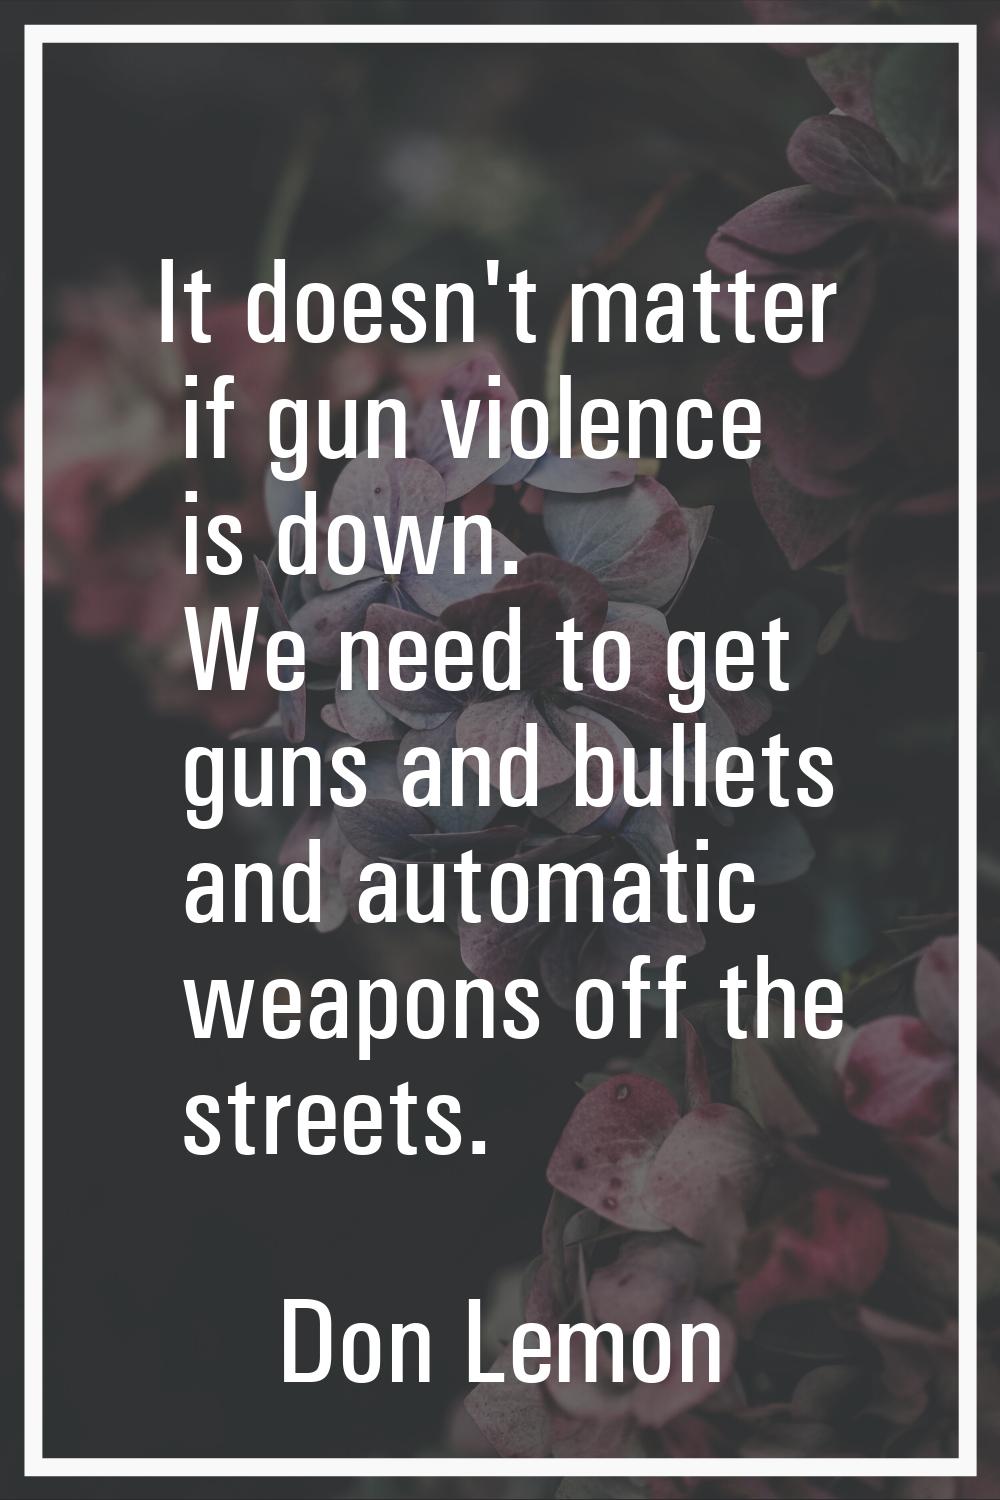 It doesn't matter if gun violence is down. We need to get guns and bullets and automatic weapons of